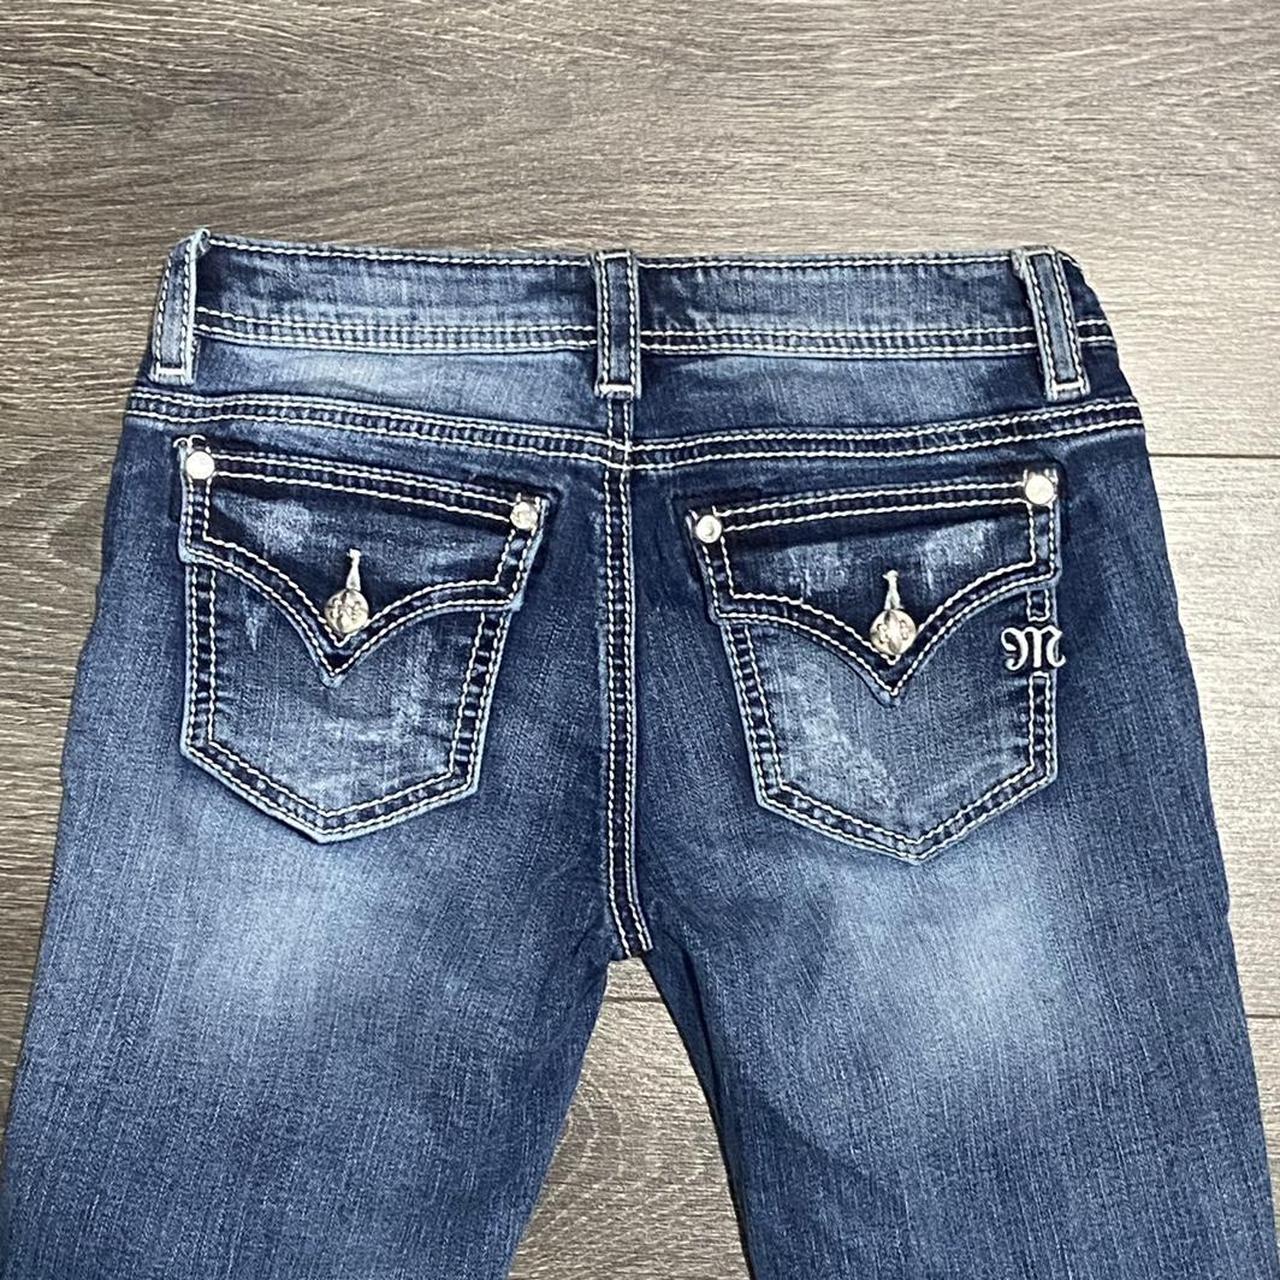 miss me jeans for kids